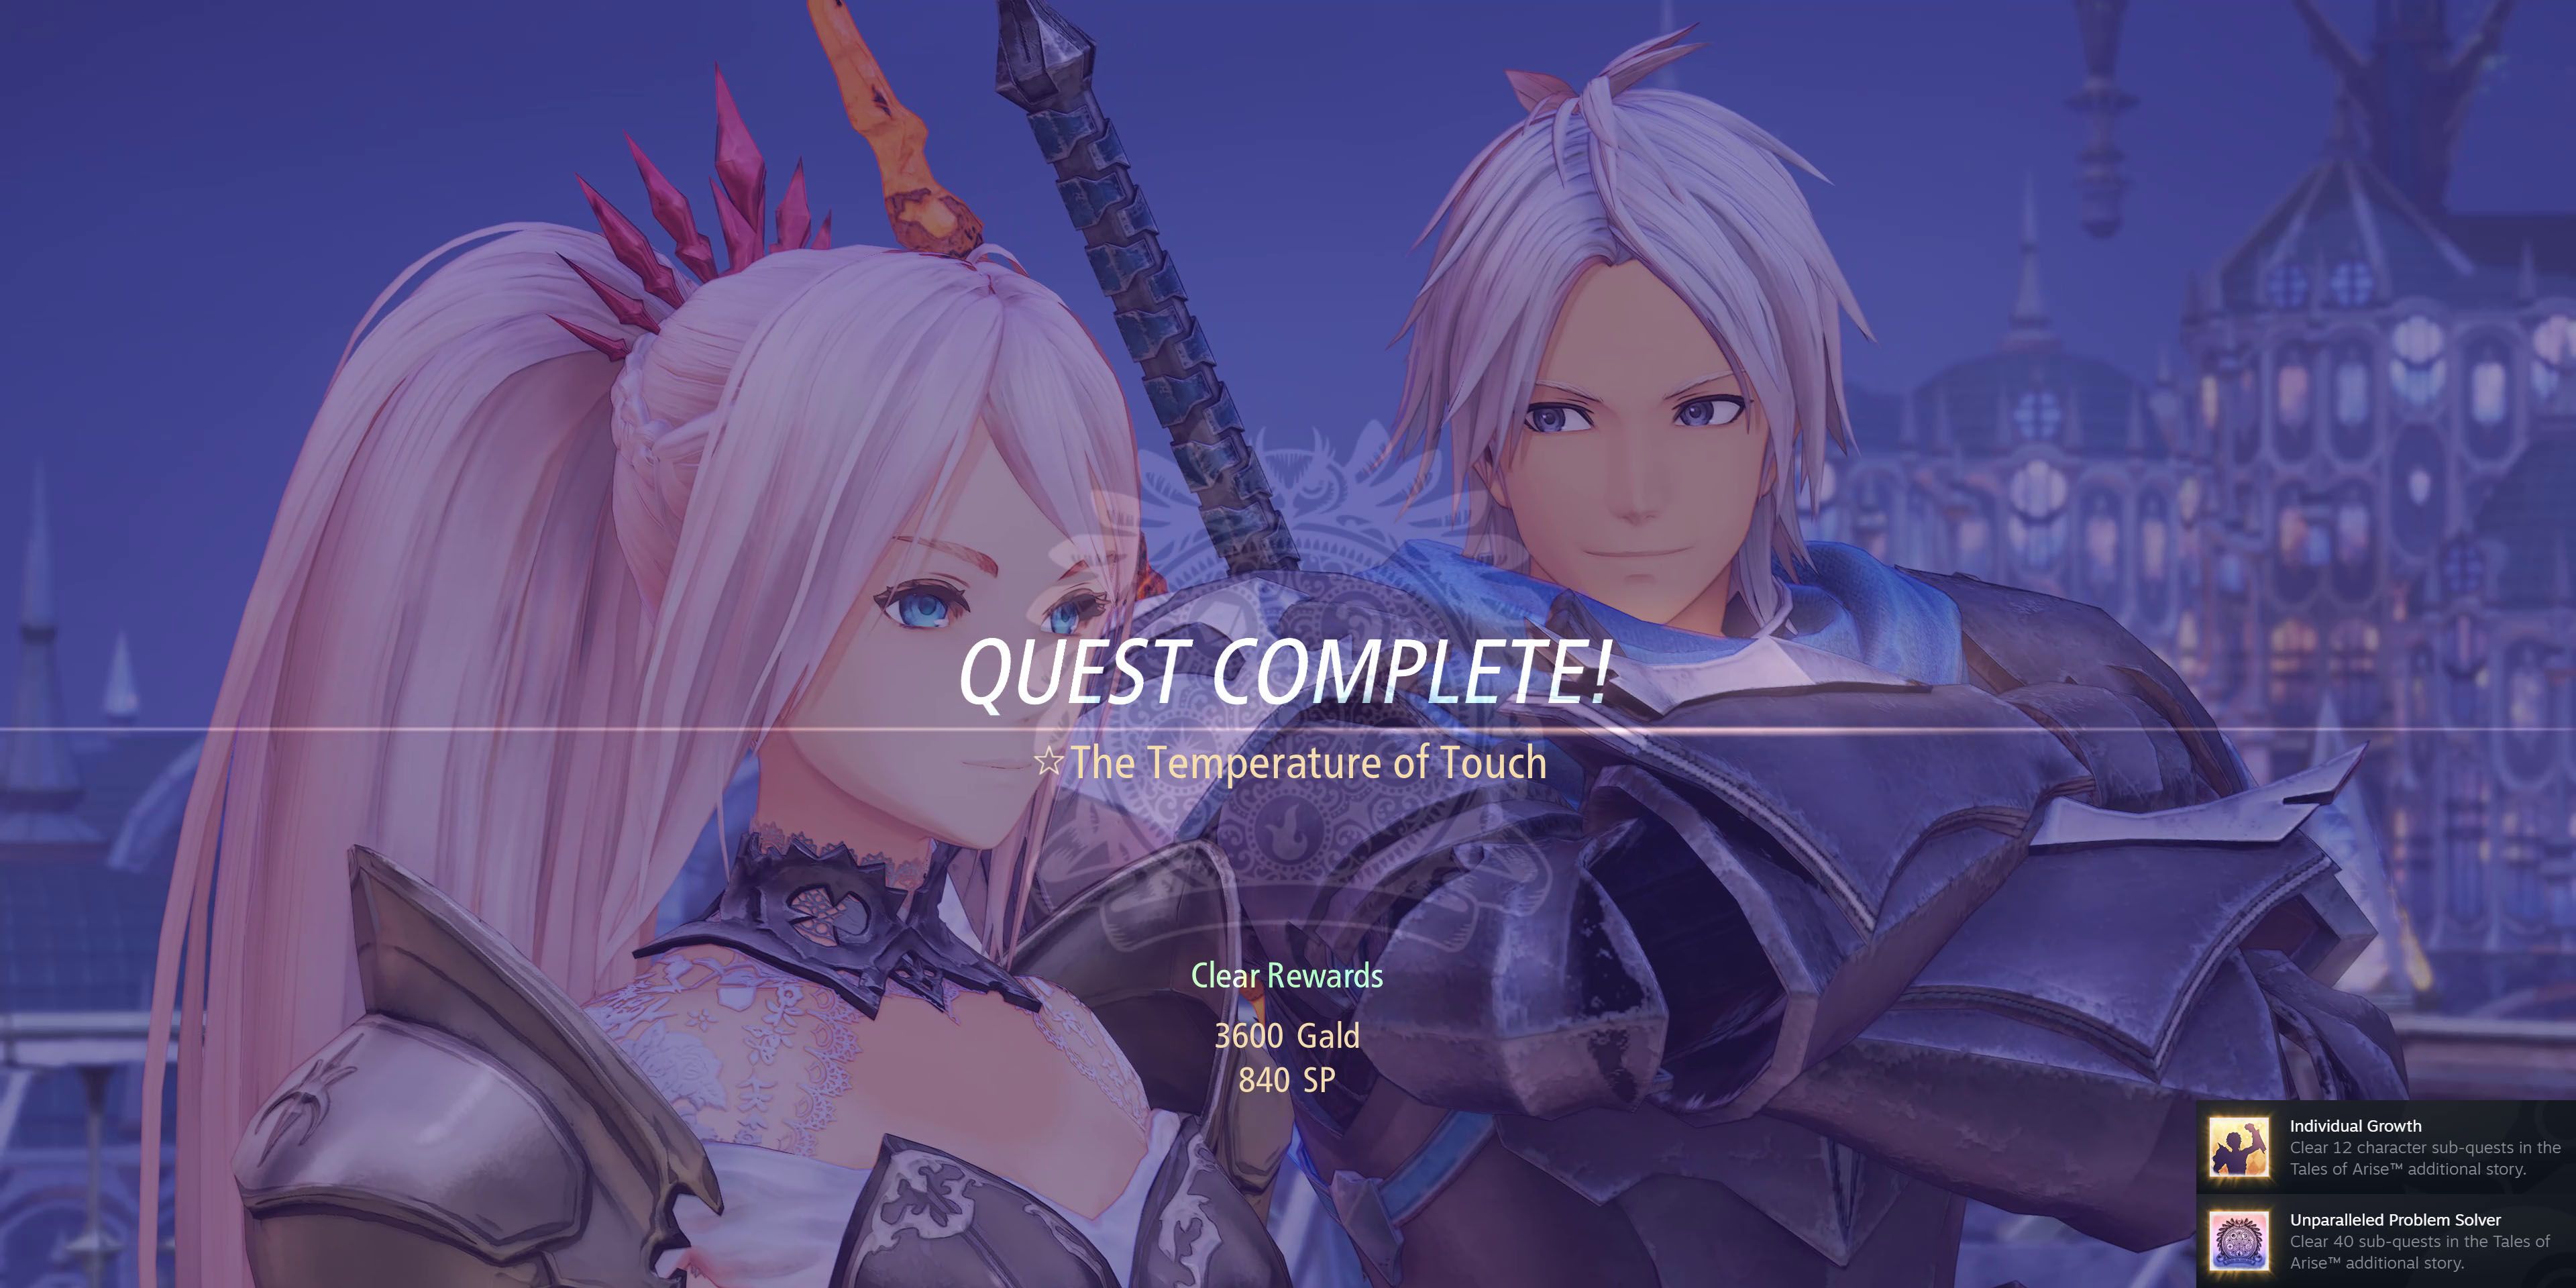 Unlocking the Unparalleled Problem Solver and Individual Growth achievements in Tales of Arise: Beyond the Dawn